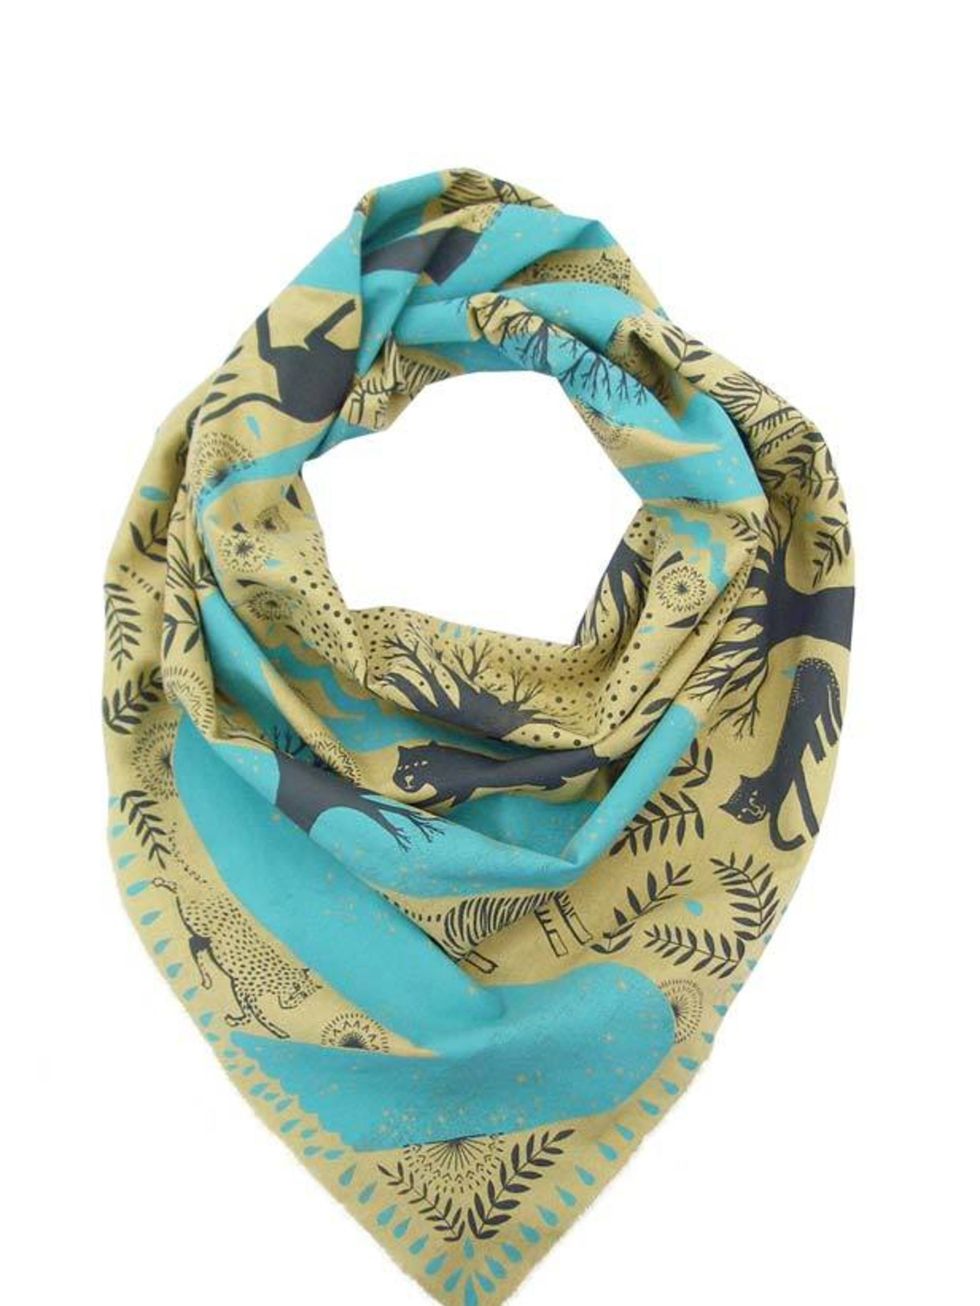 <p>Glastonbury and Hop Farm are imminent, making festival packing the hot topic in ELLE towers. So if you want to inject a quirky edge to your Wellington and Barbour combo then add this Bonbi scarf to your backpack<a href="http://www.bonbiforest.com/">Bo